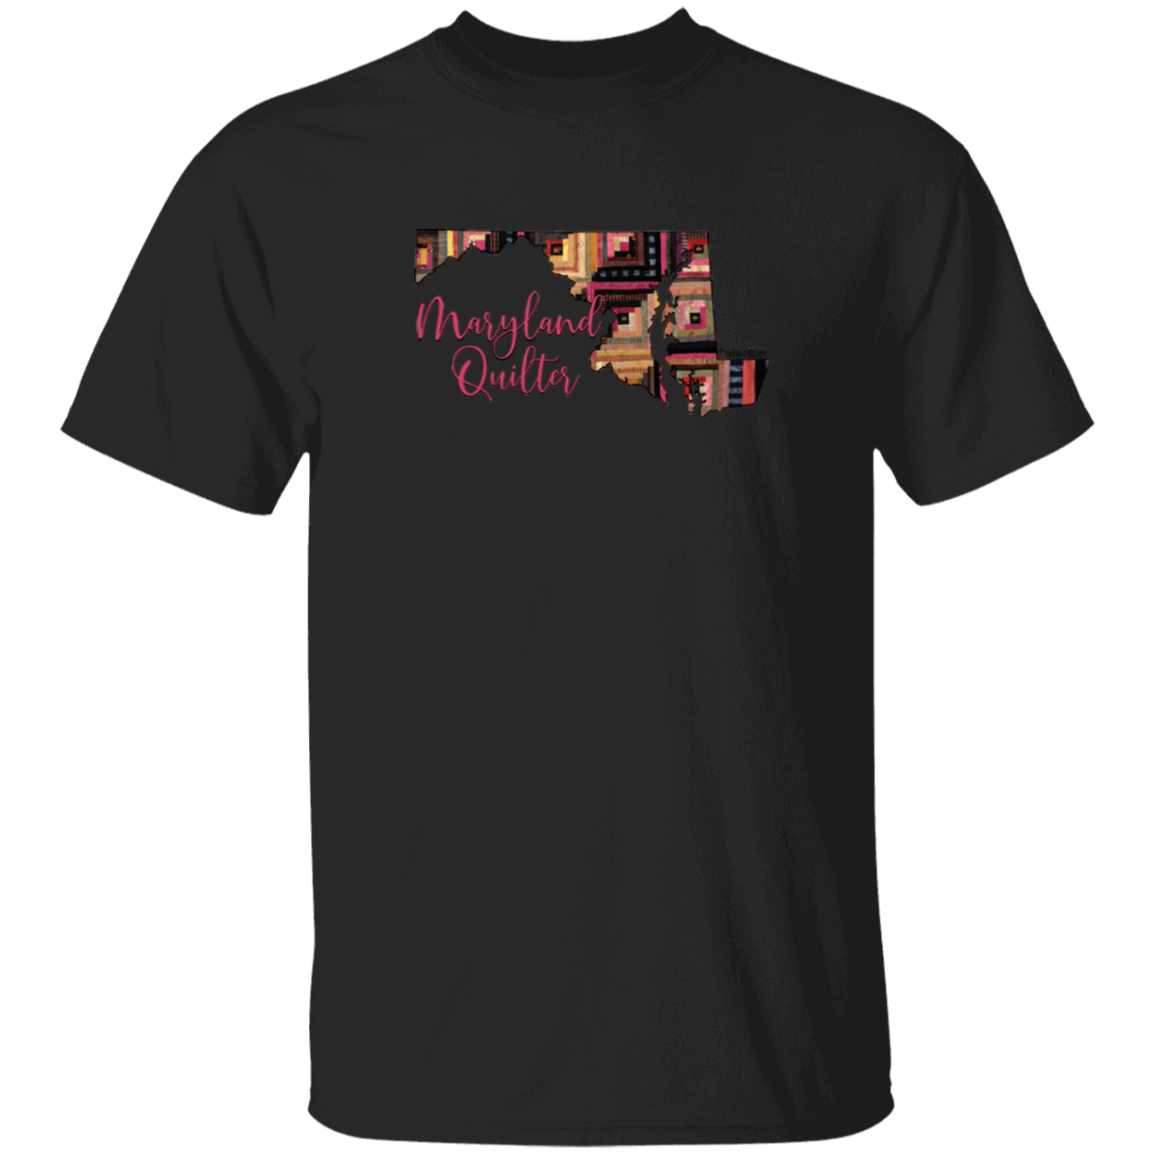 Maryland Quilter T-Shirt, Gift for Quilting Friends and Family